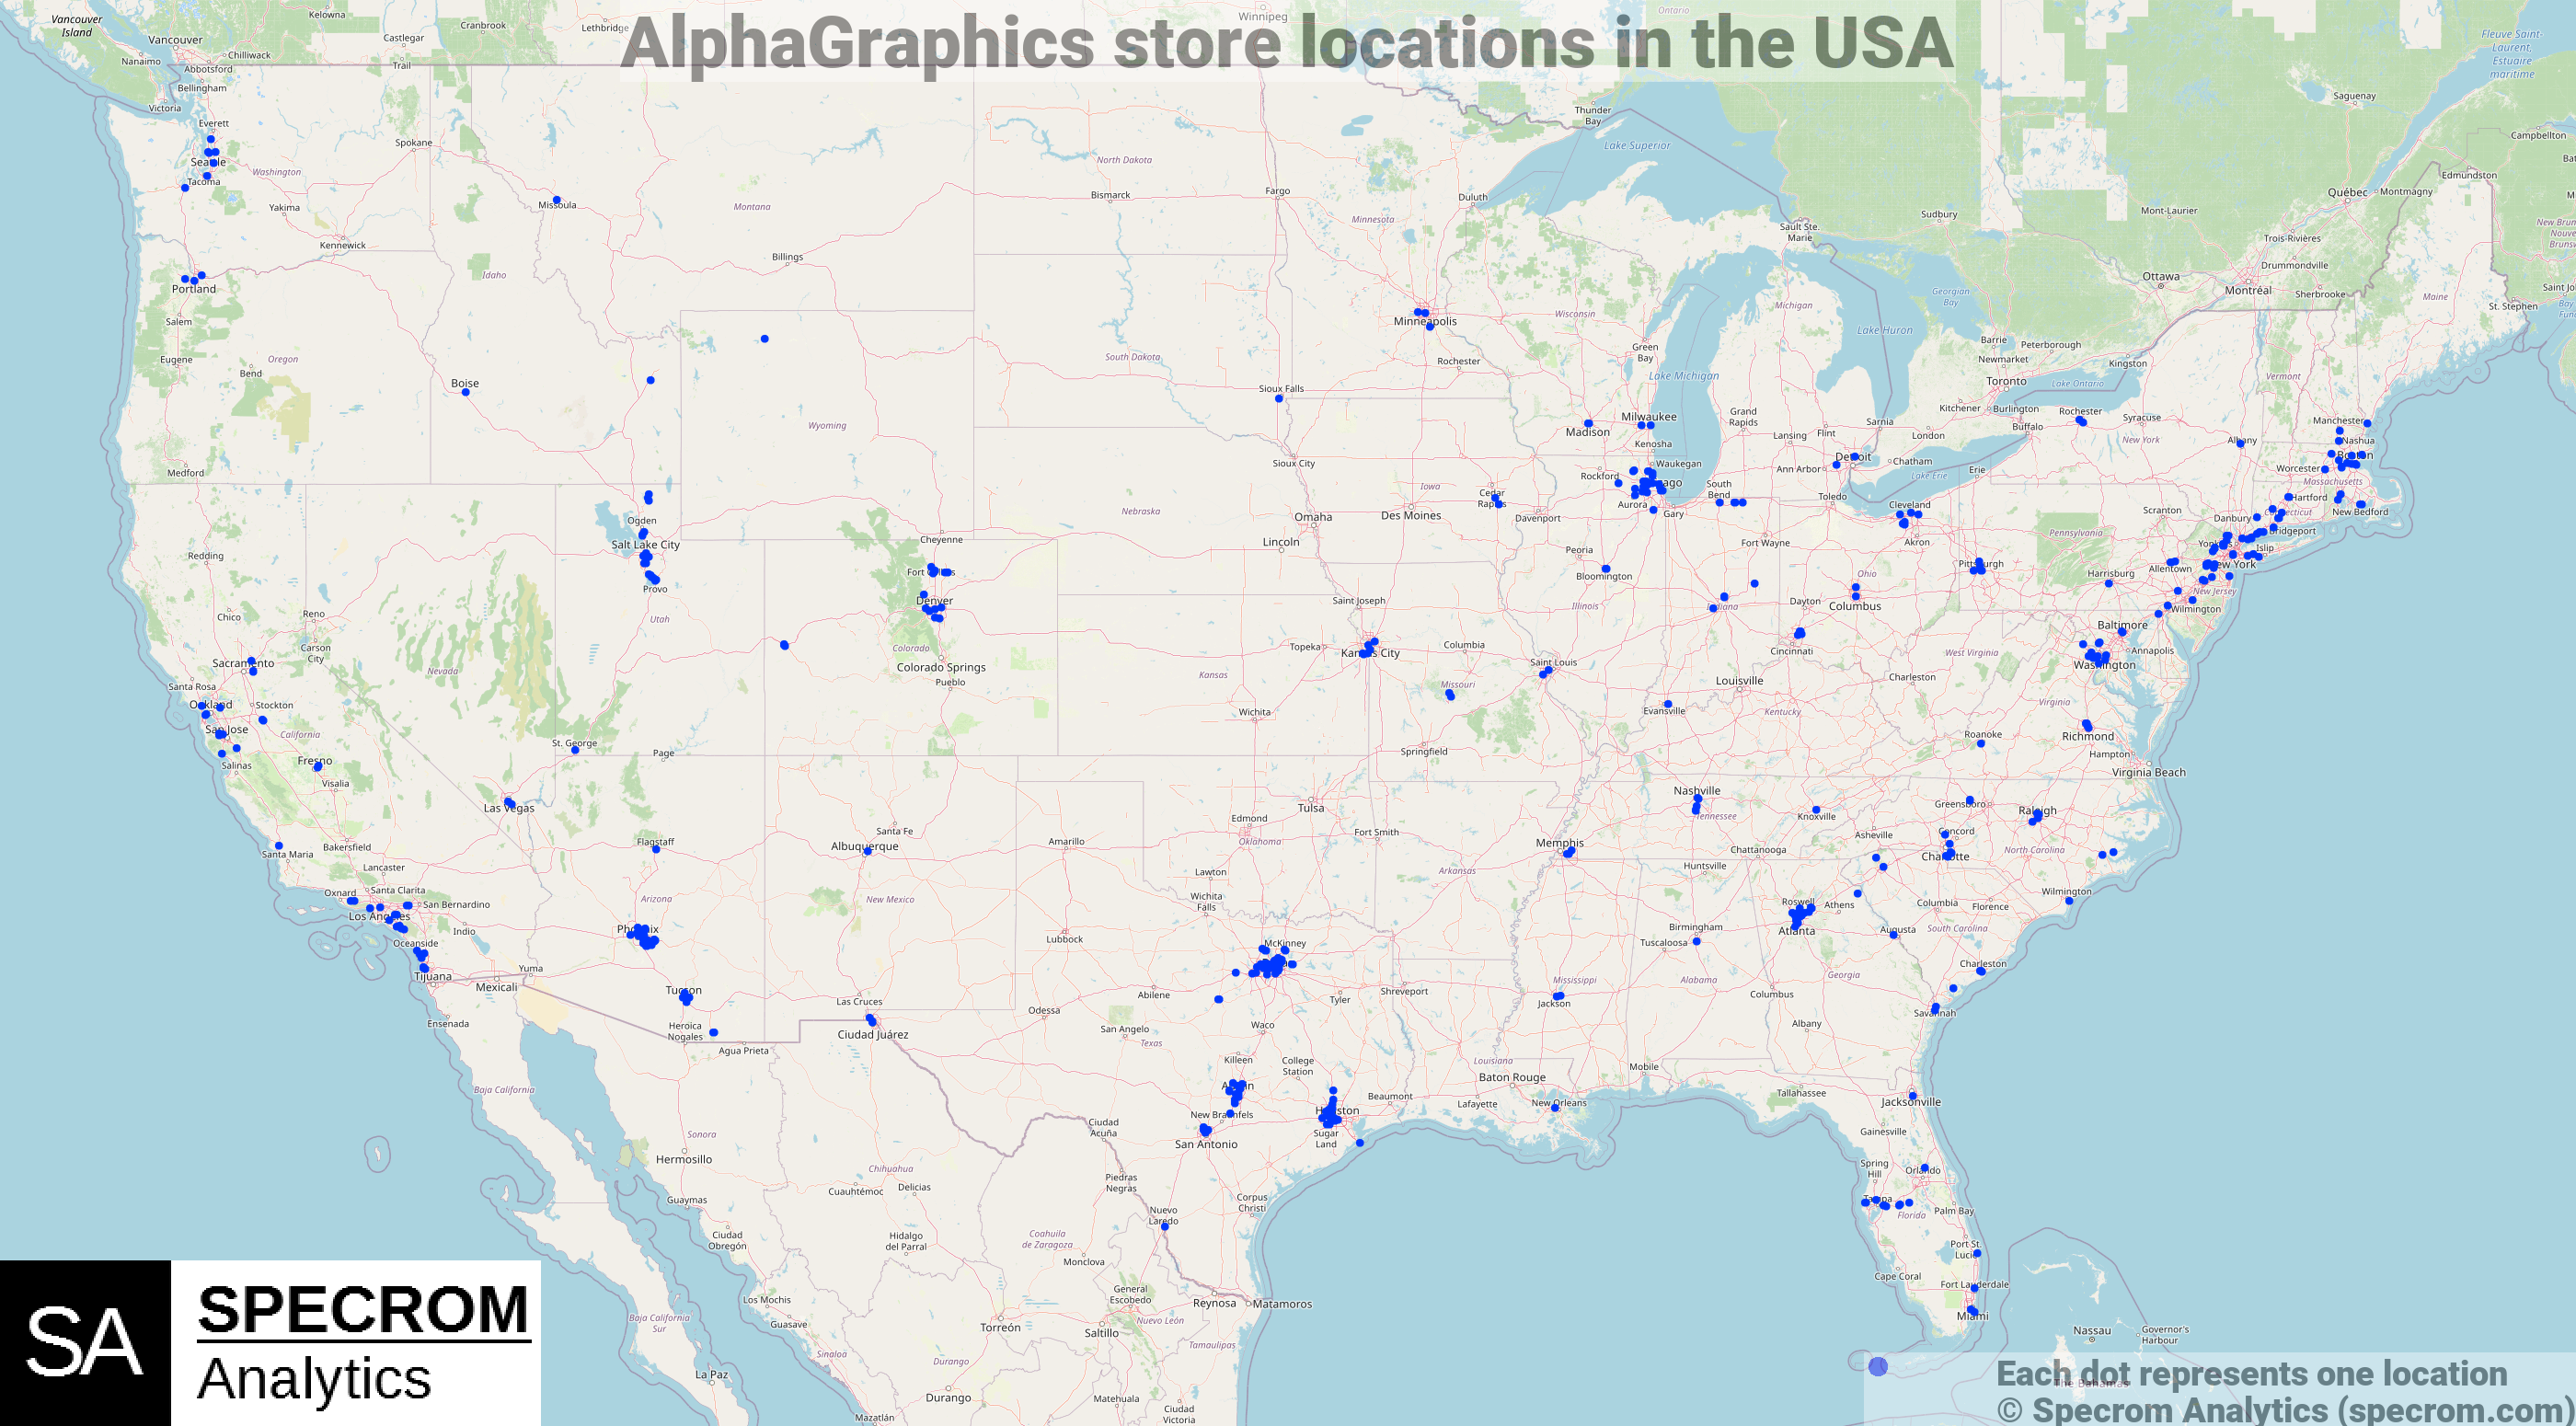 AlphaGraphics store locations in the USA